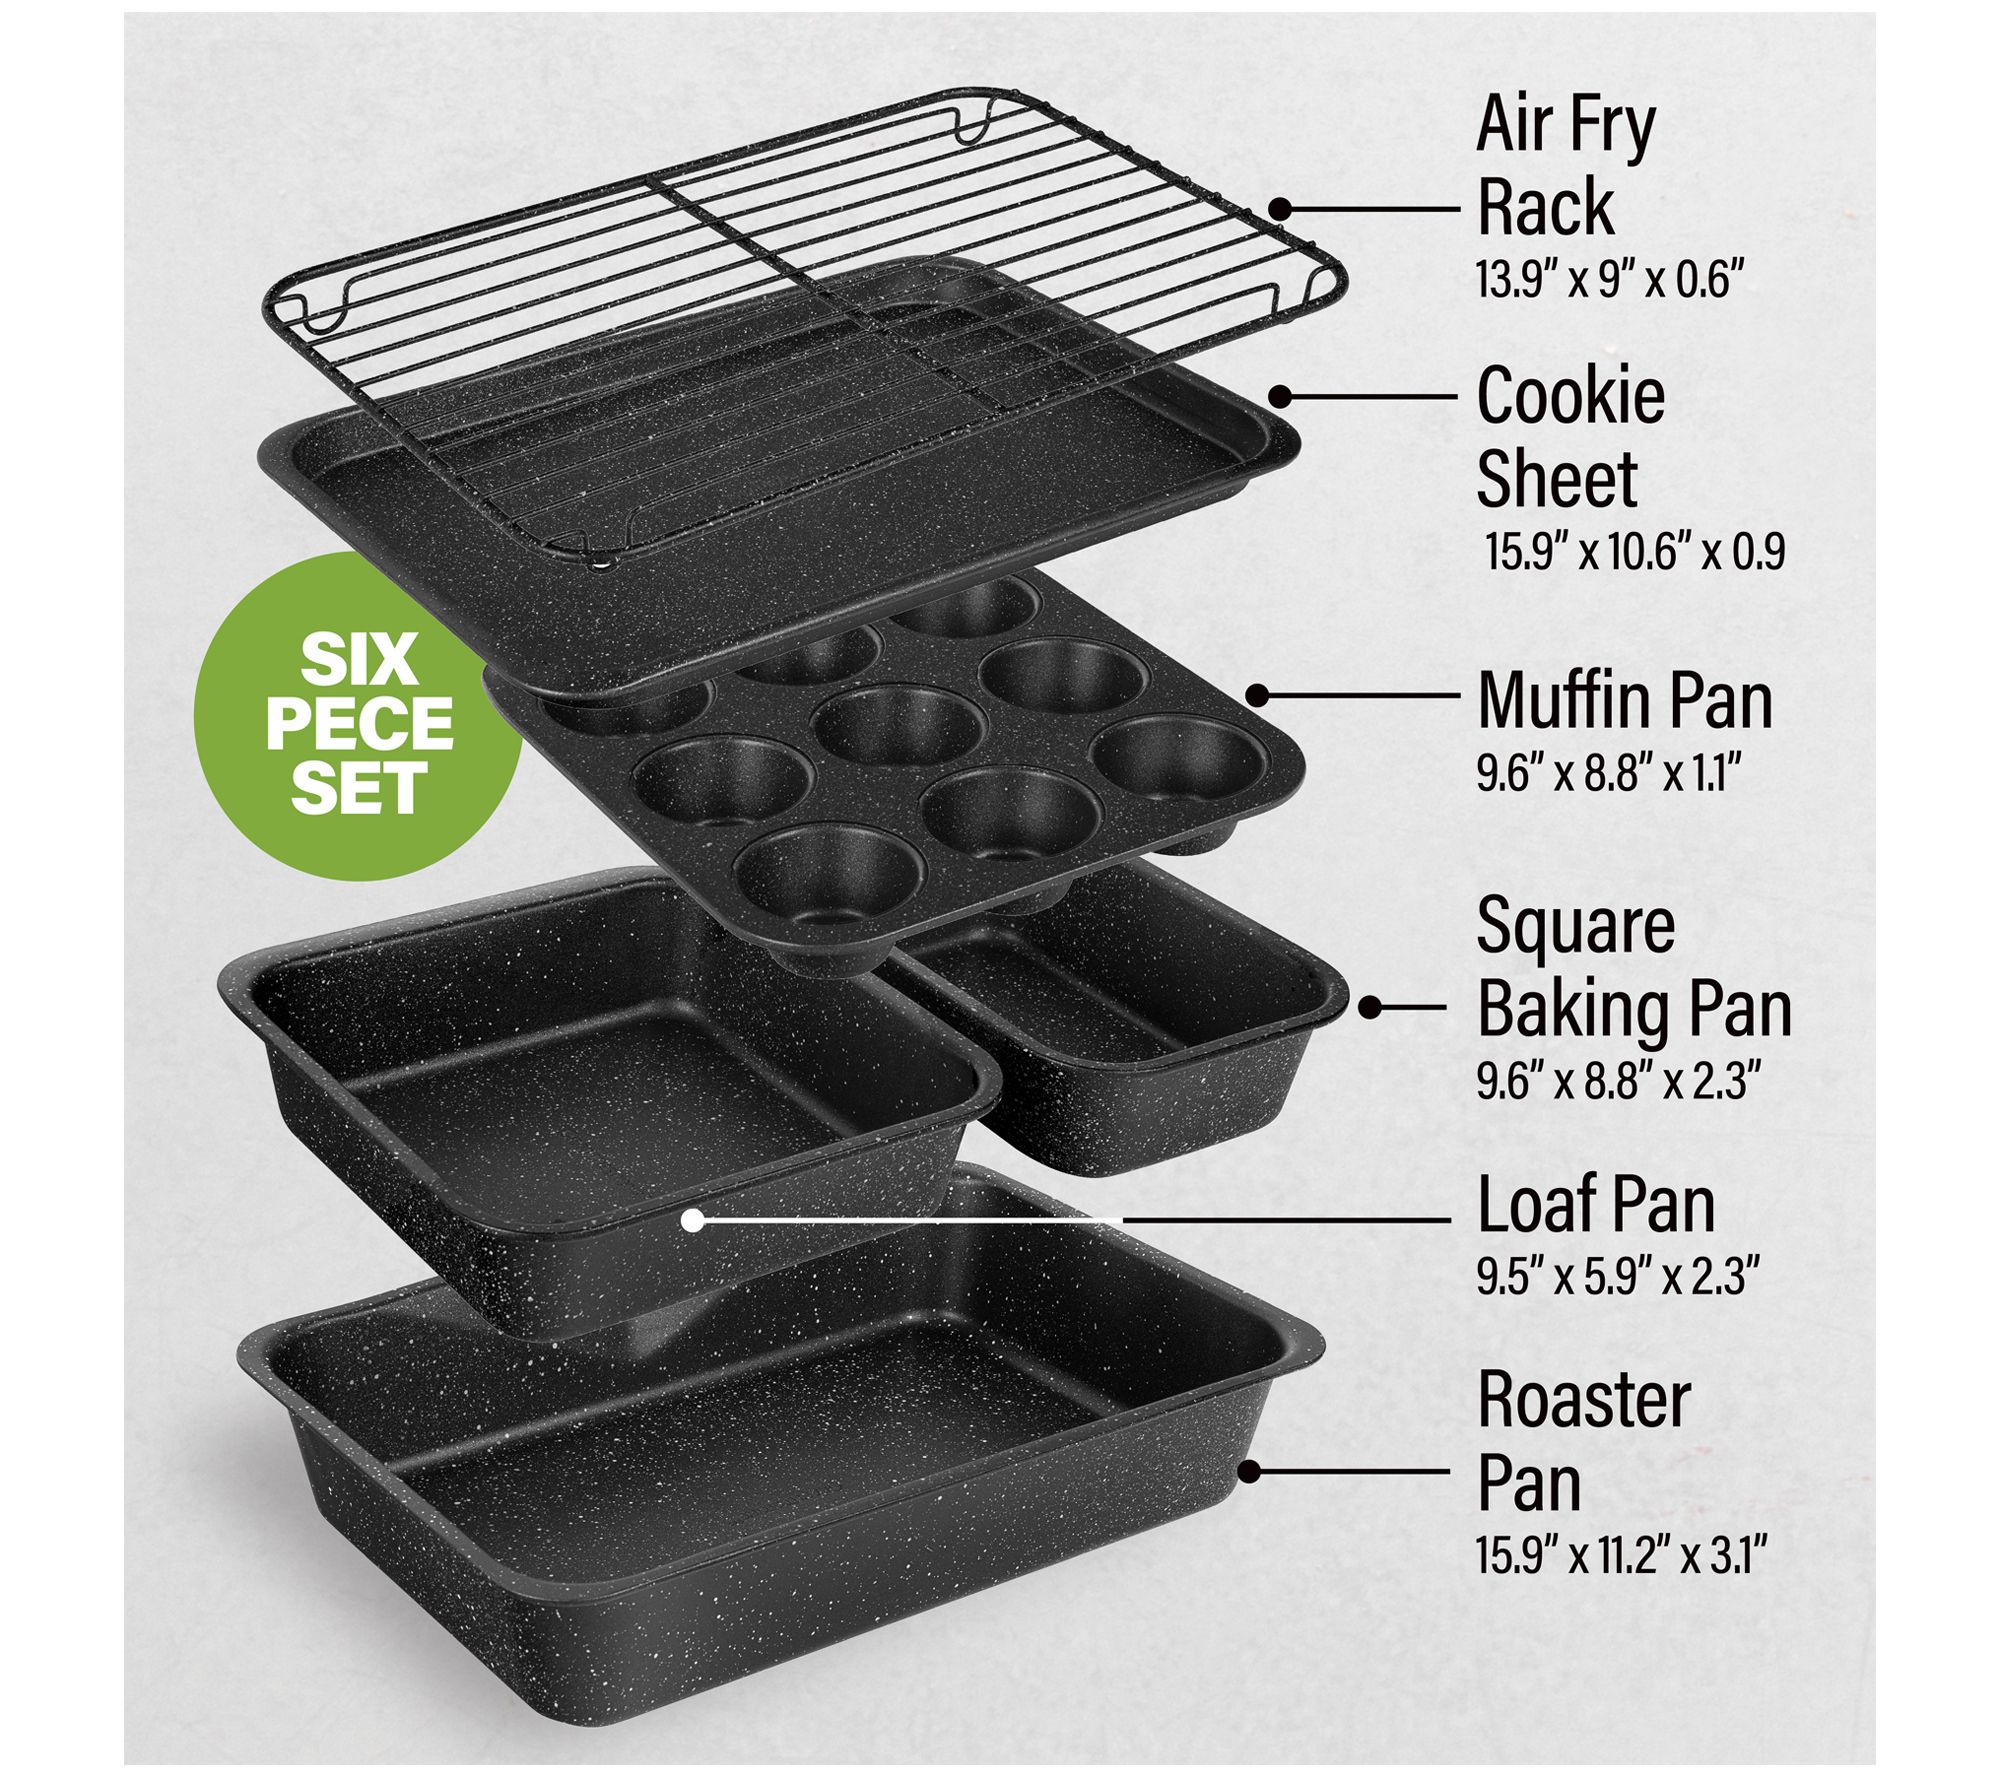 Baker's Secret Baking sheets for Oven - Bakeware Set of 3 Cookie Sheets -  Cooking Trays for Baking, Nonstick Pans for Baking, Baking Pan Toaster Oven  Pans, with Handles Grip - 3 Pieces Set